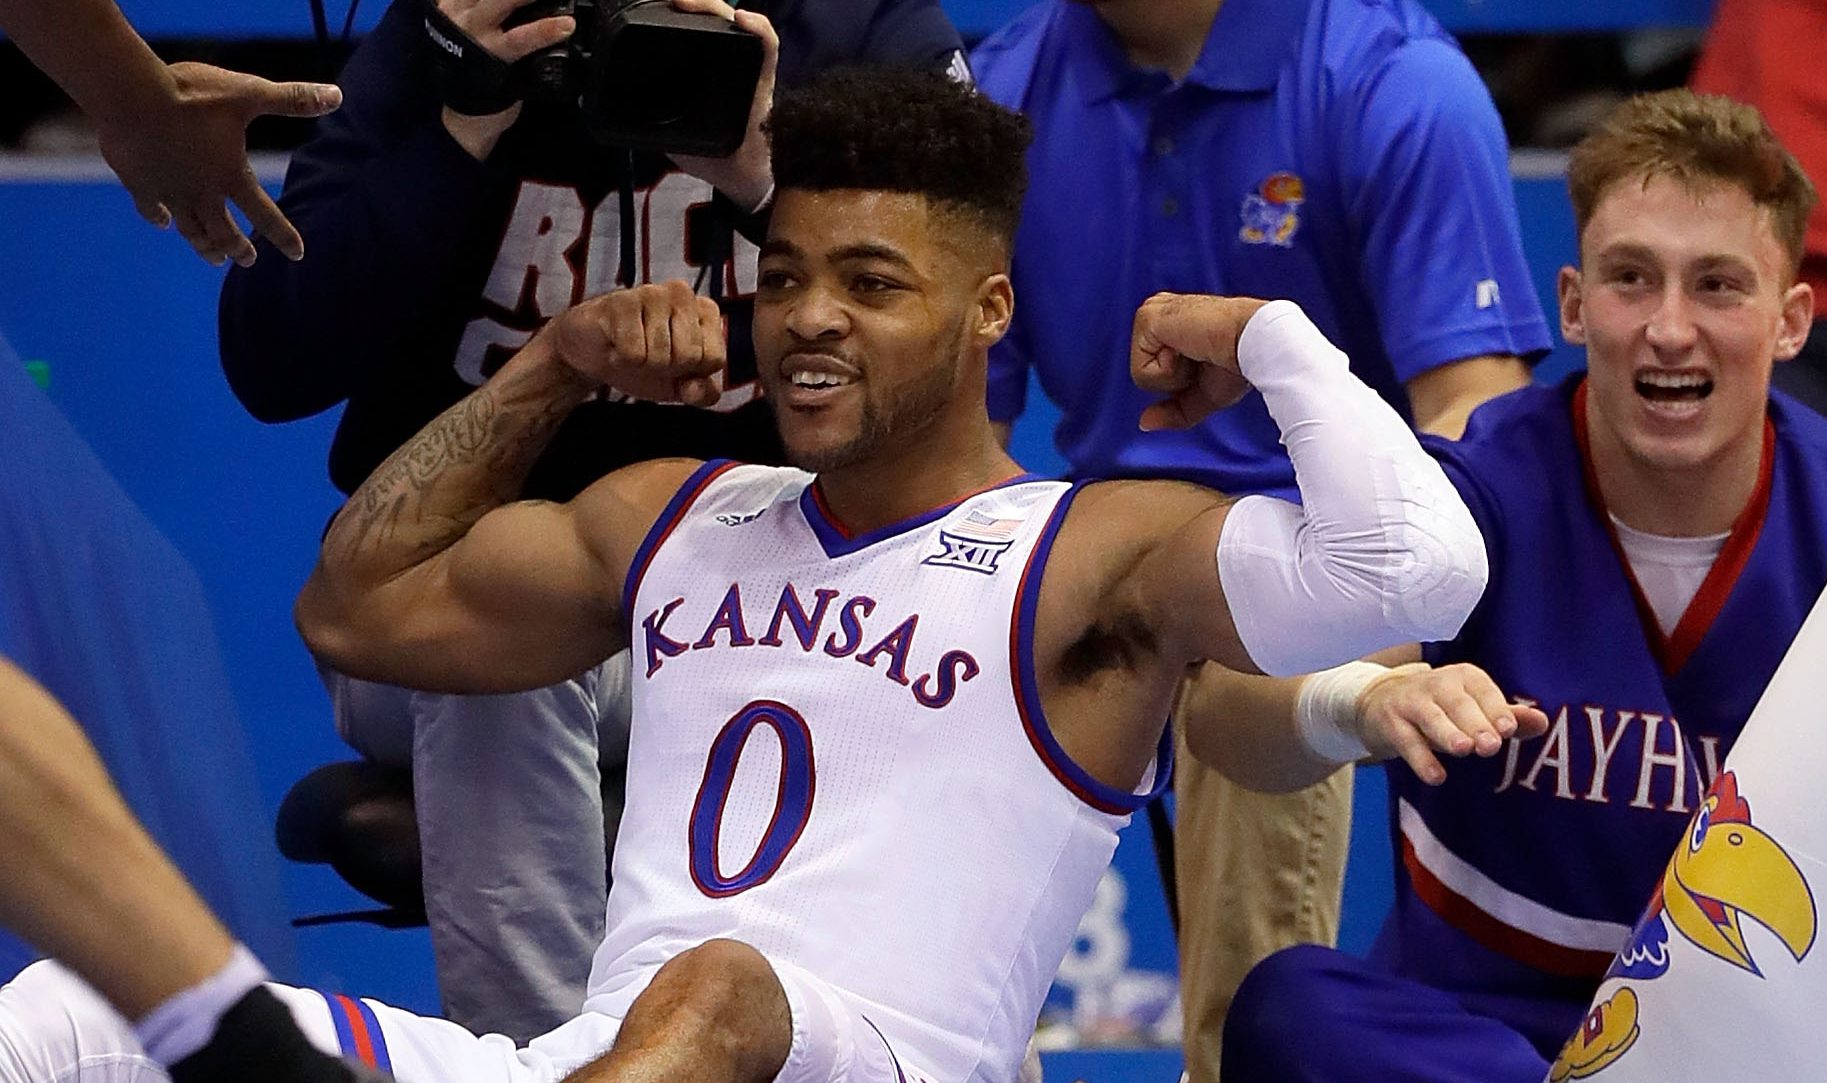 LAWRENCE, KS - DECEMBER 03: Frank Mason III #0 of the Kansas Jayhawks is reacts after making a basket during the game against the Stanford Cardinal at Allen Fieldhouse on December 3, 2016 in Lawrence, Kansas. (Photo by Jamie Squire/Getty Images)